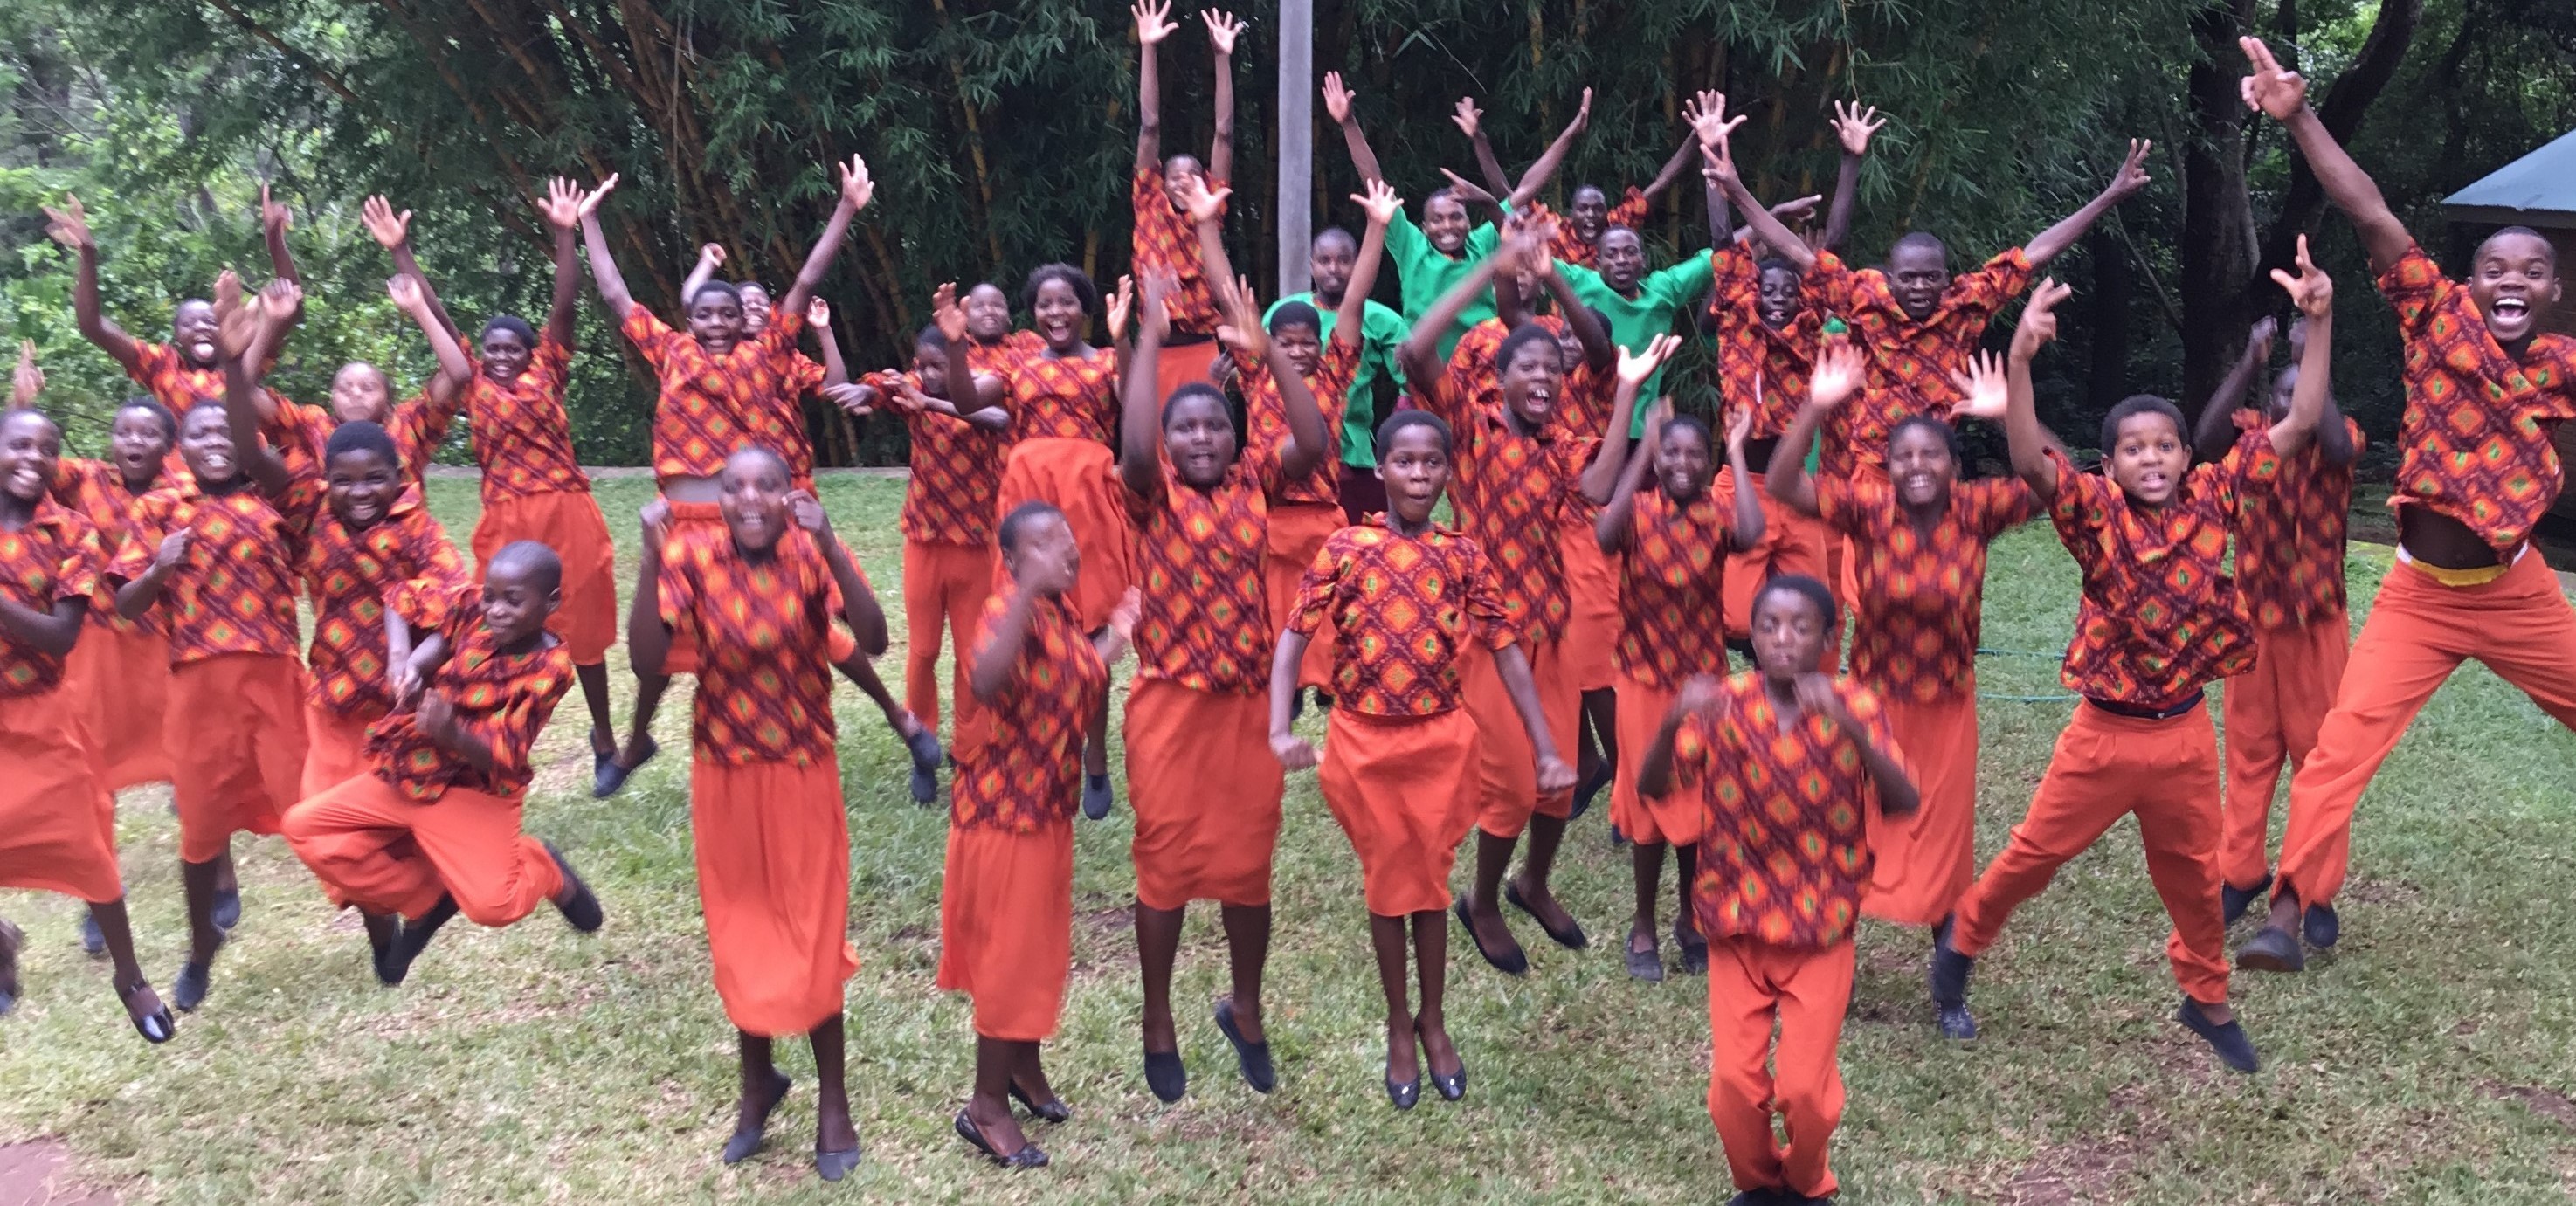 The Likhubula Children's Choir, supported by Malawi Music Fund.